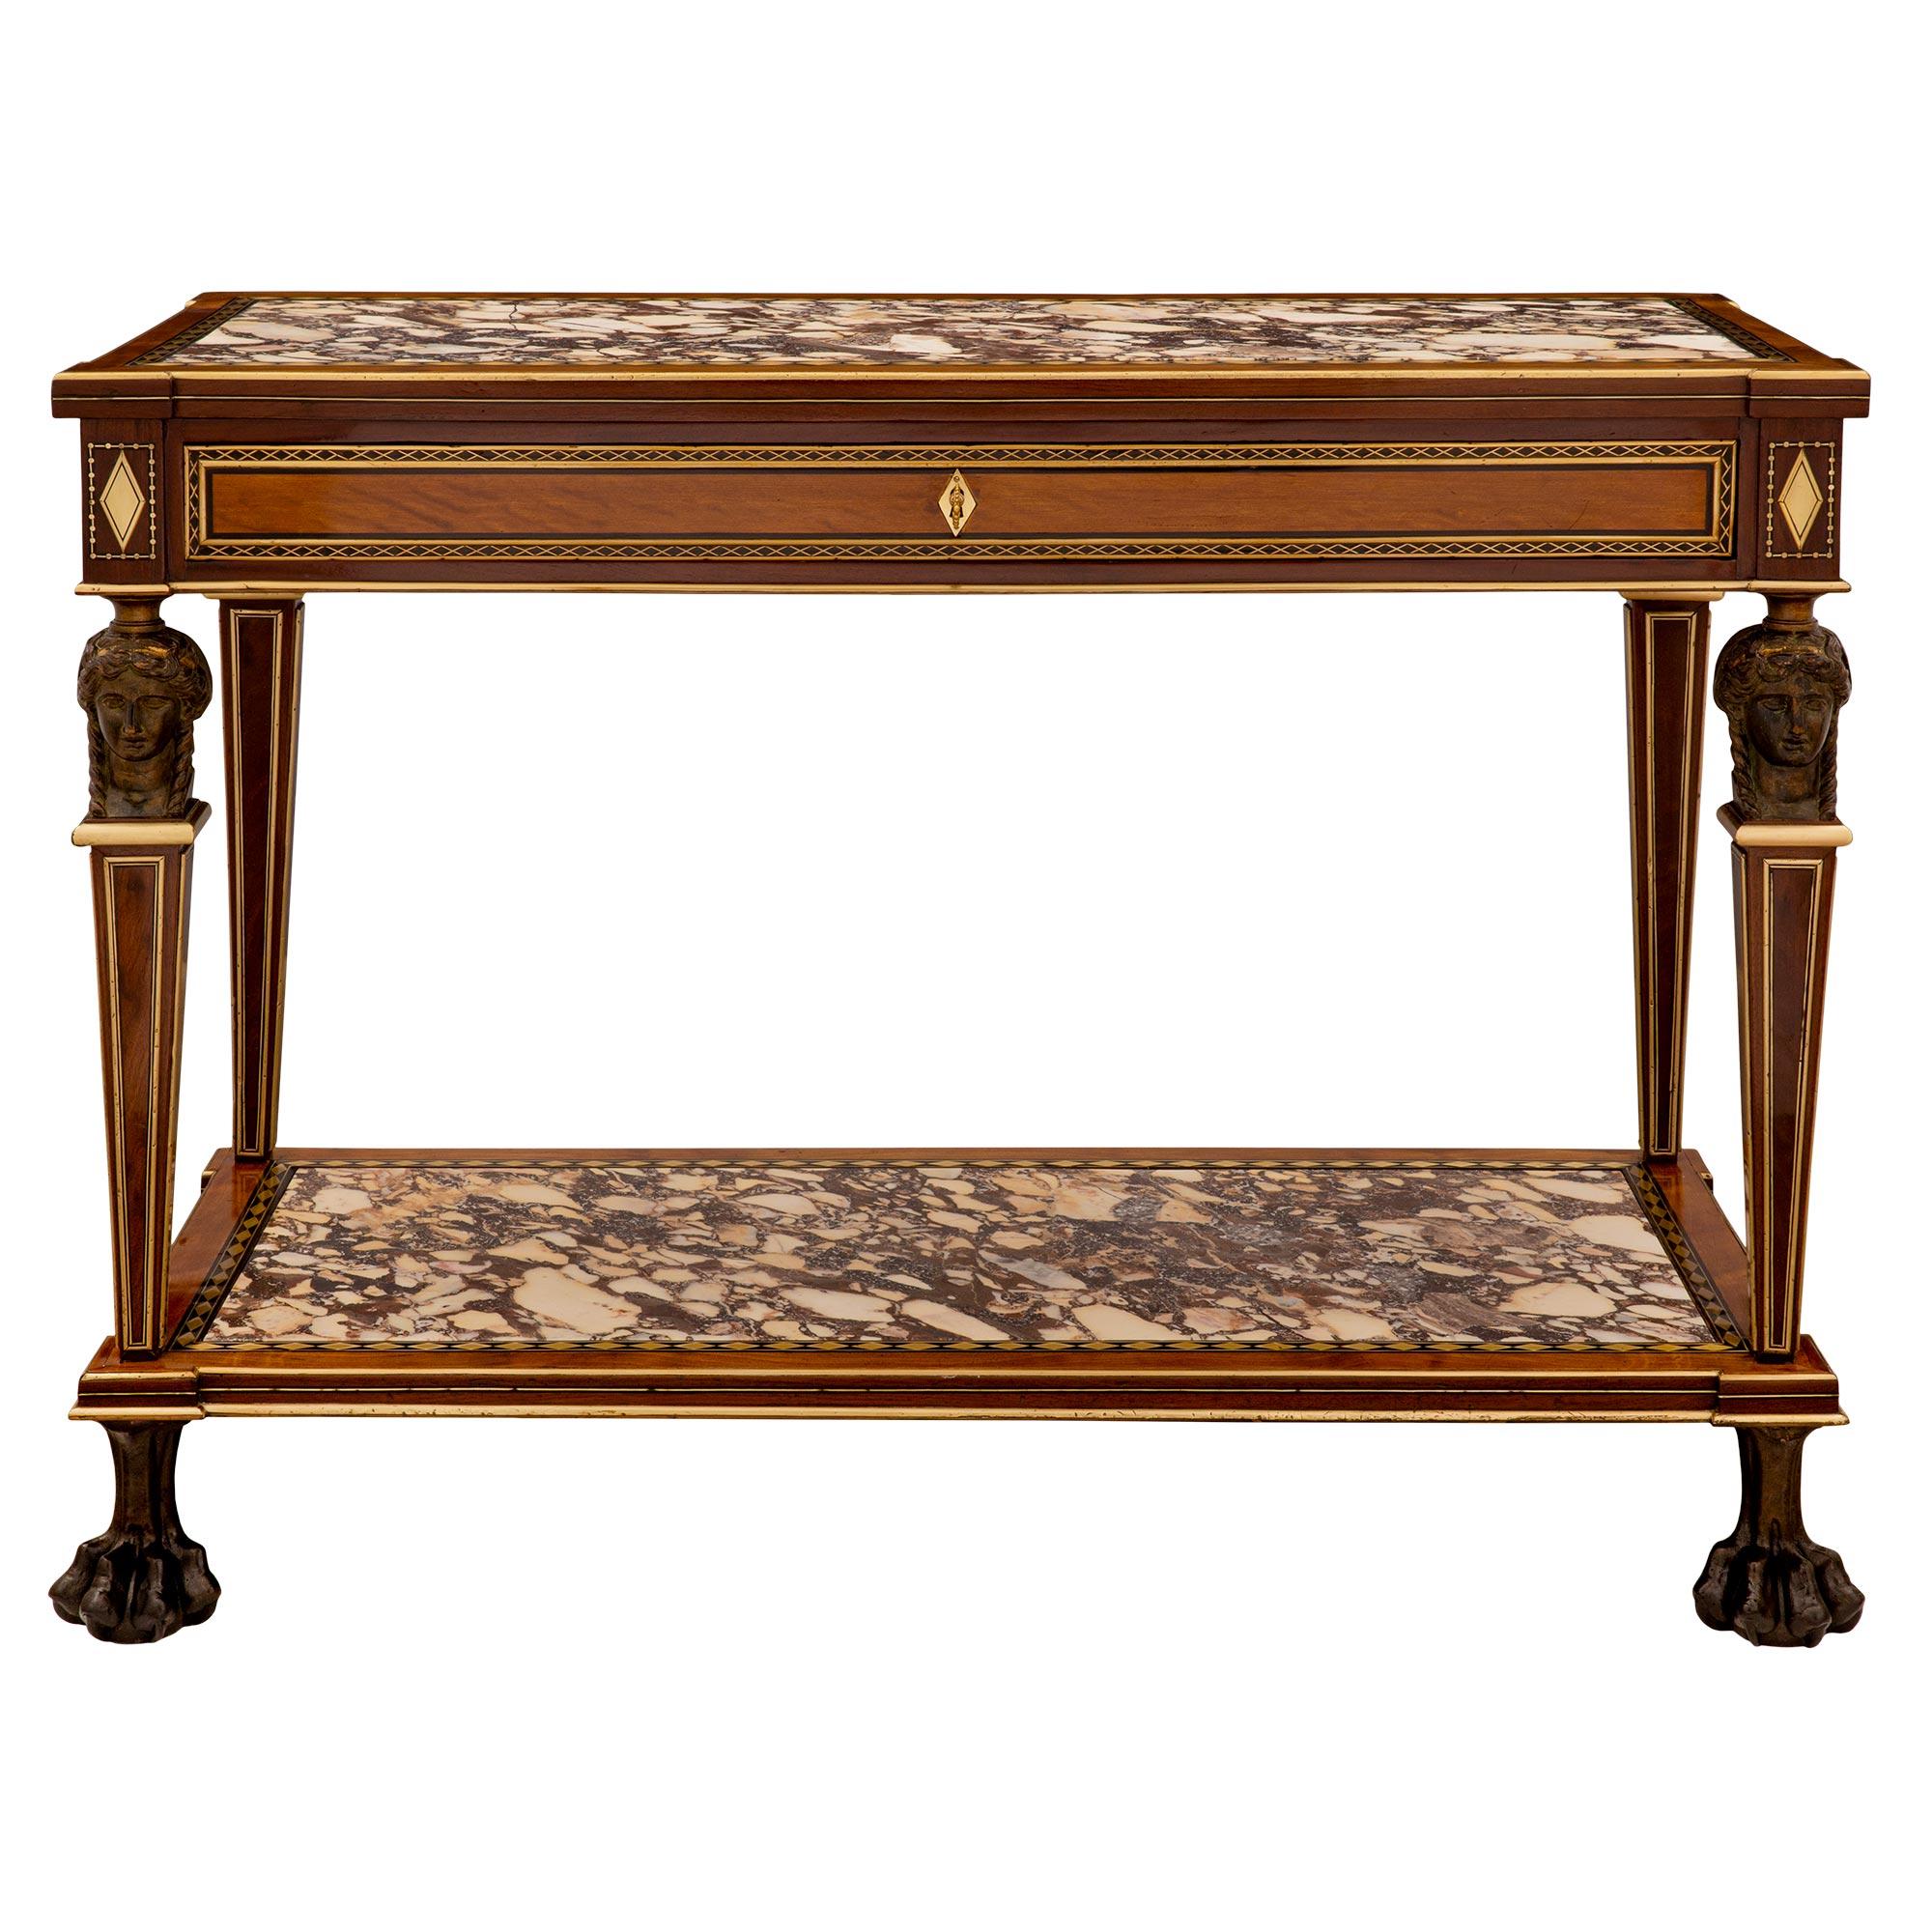 Italian 19th Century Neoclassical Style Freestanding Console For Sale